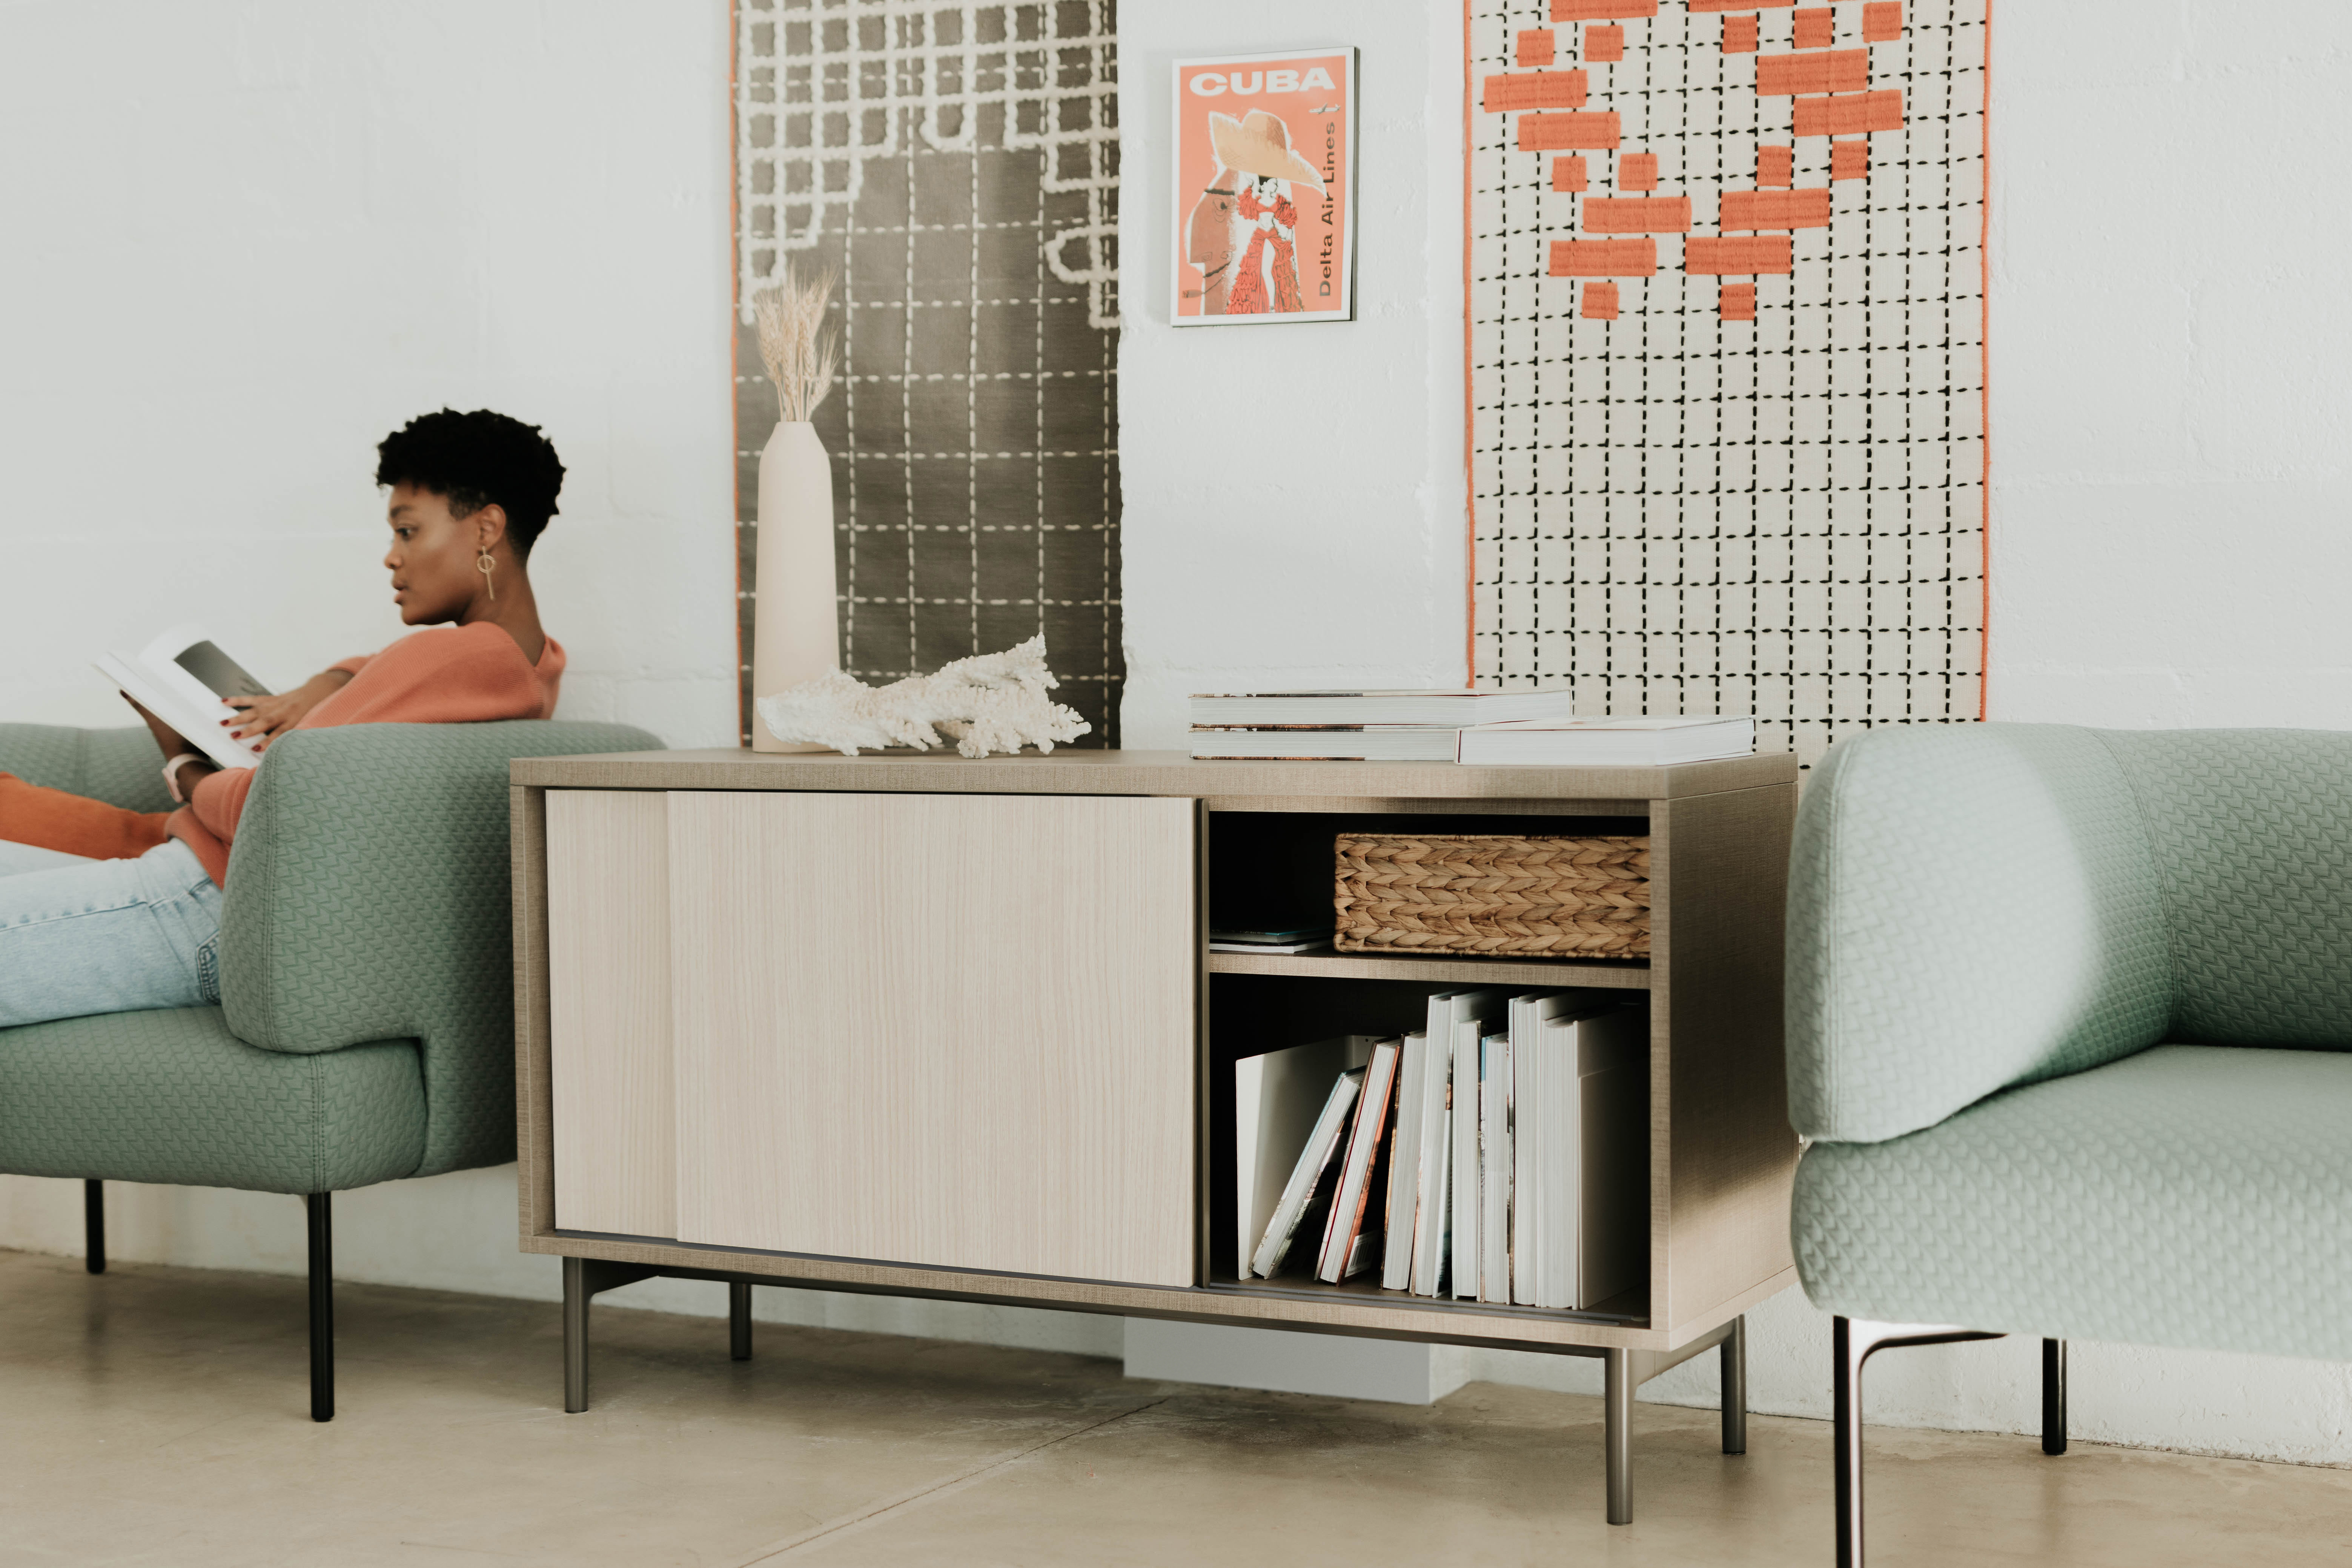 Be_Hold credenza with sliding cabinet doors over shelves.